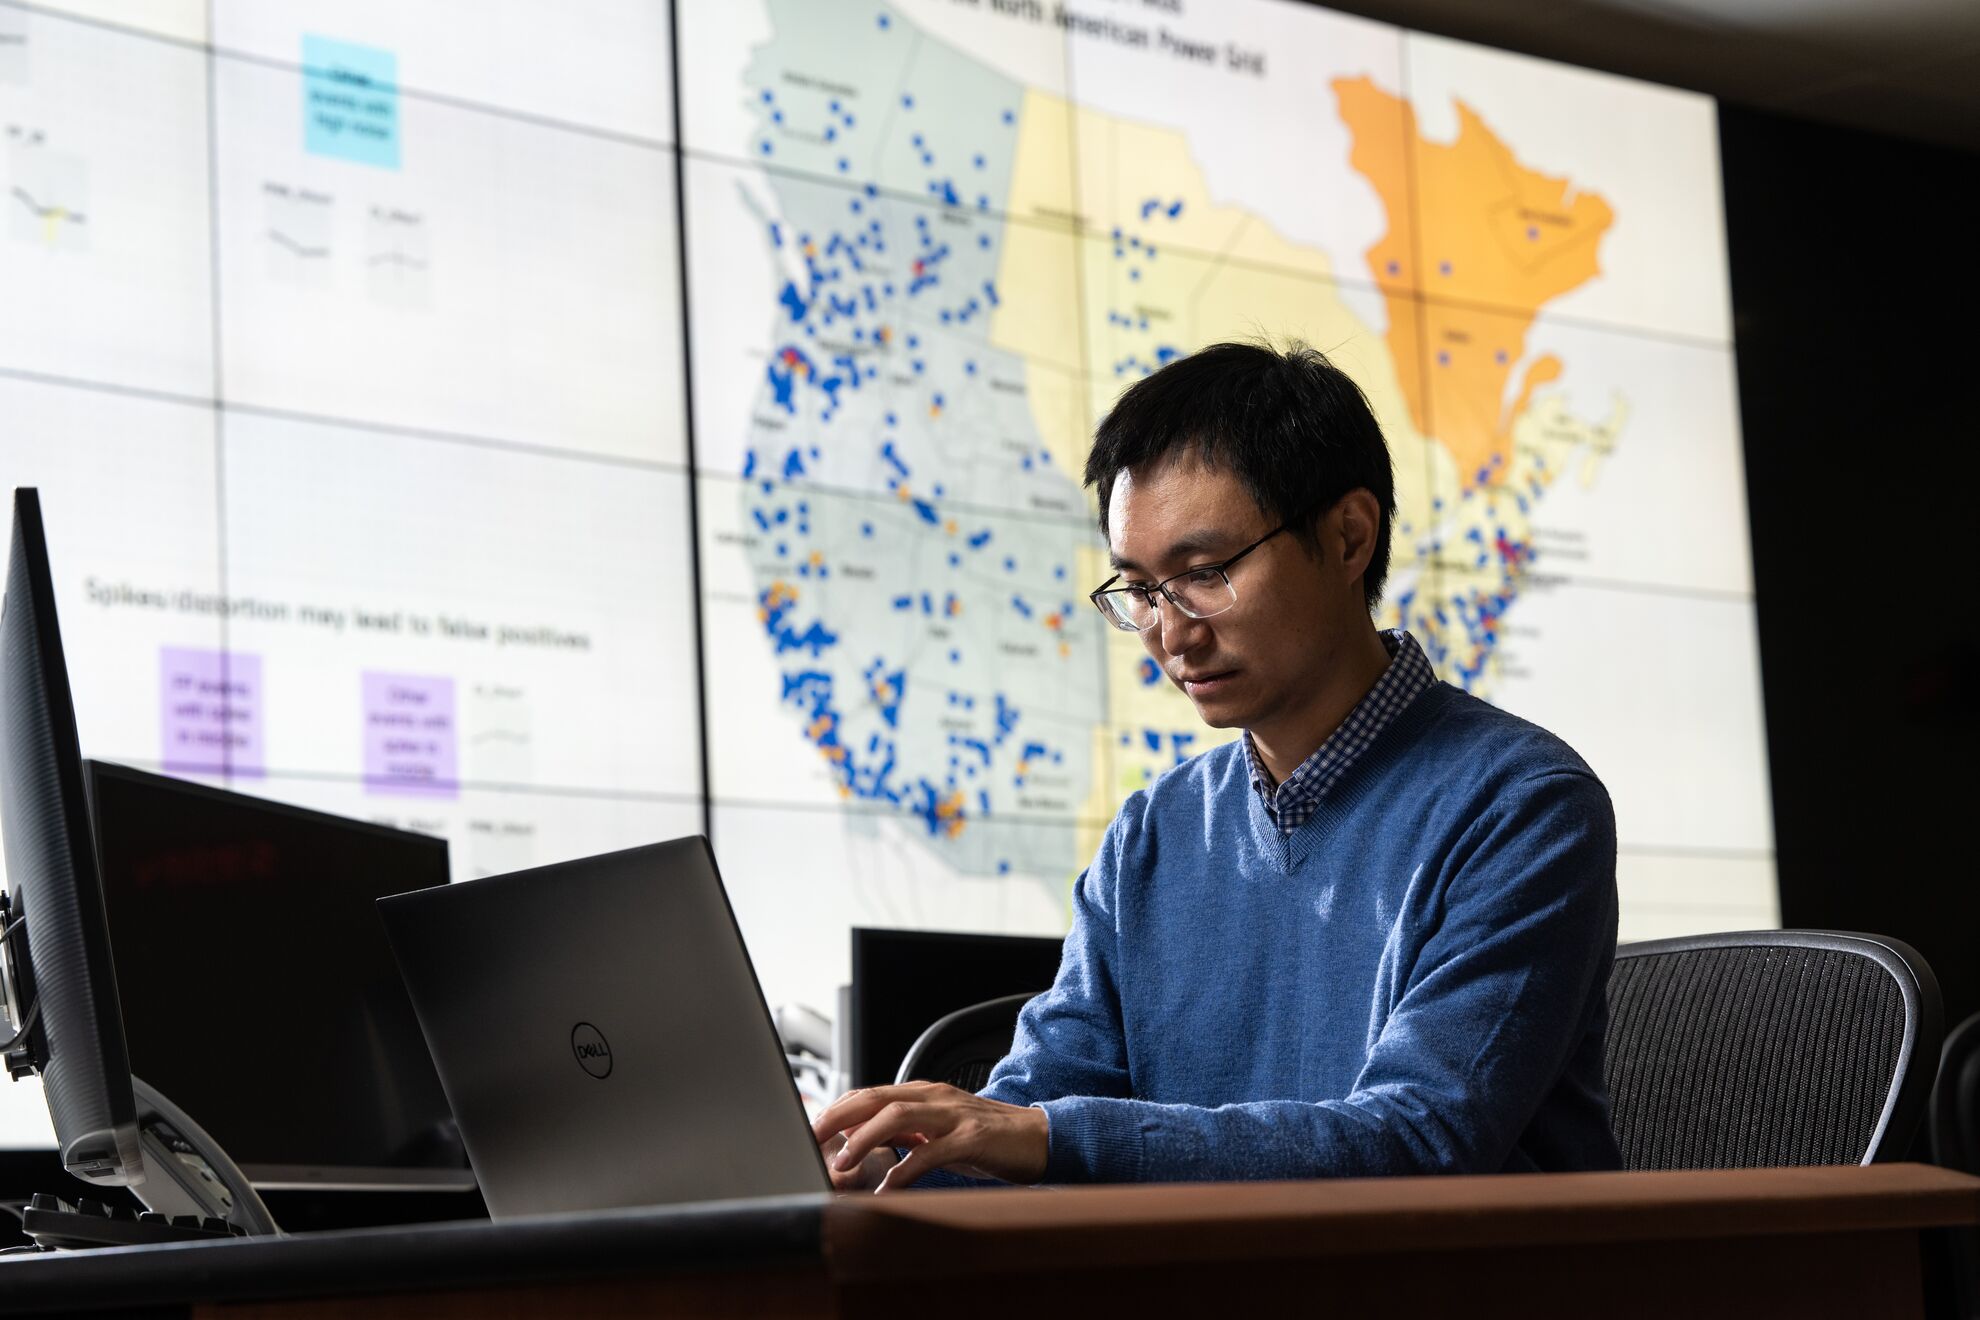 A PNNL researcher using a computer to apply artificial intelligence measurements to the electrical grid; an image of the U.S. electrical grid is in the background.